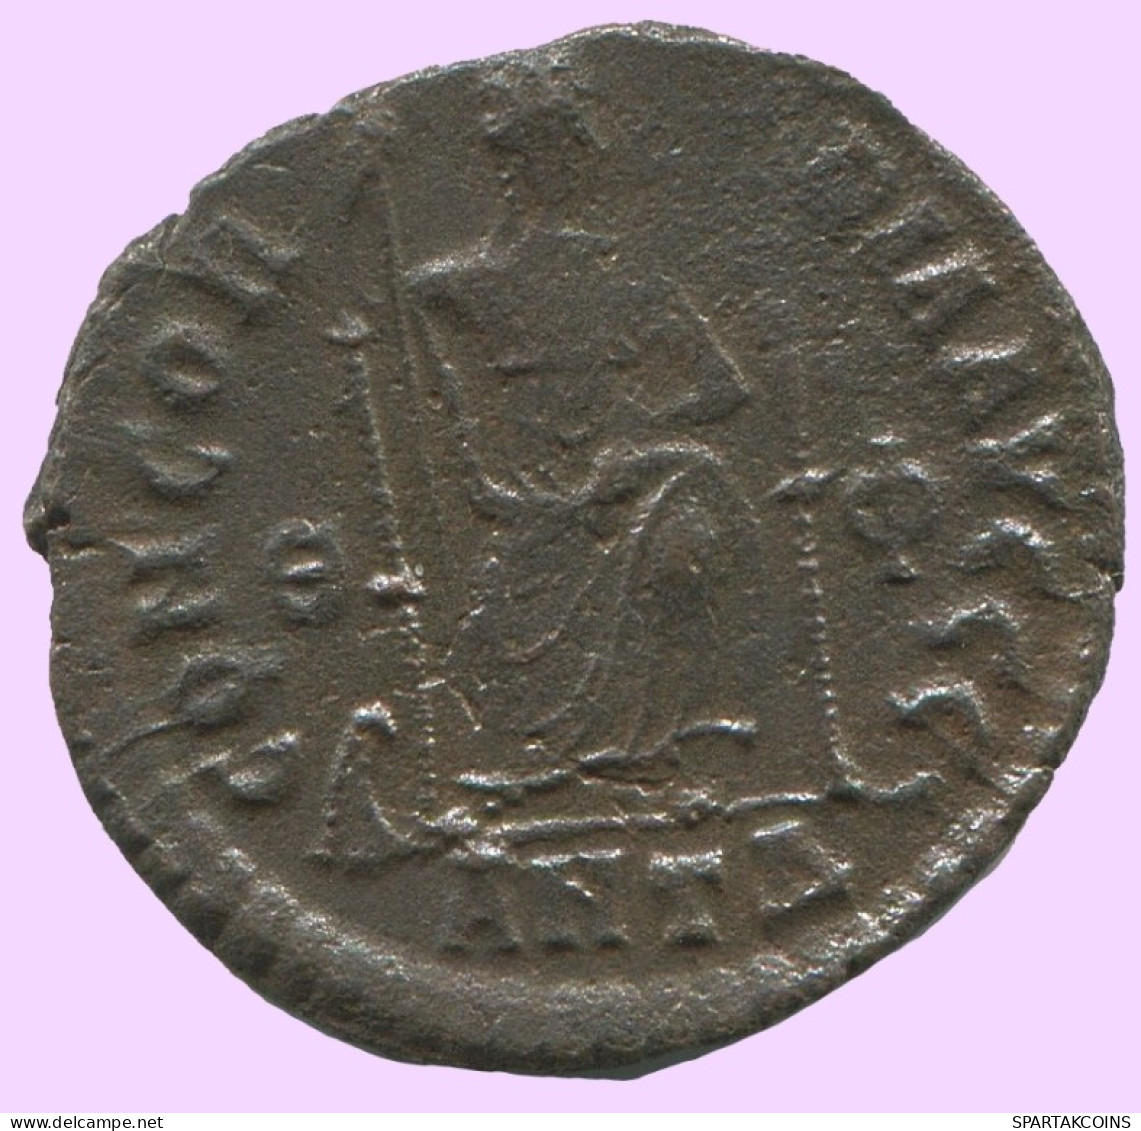 LATE ROMAN EMPIRE Pièce Antique Authentique Roman Pièce 1.6g/19mm #ANT2195.14.F.A - The End Of Empire (363 AD To 476 AD)